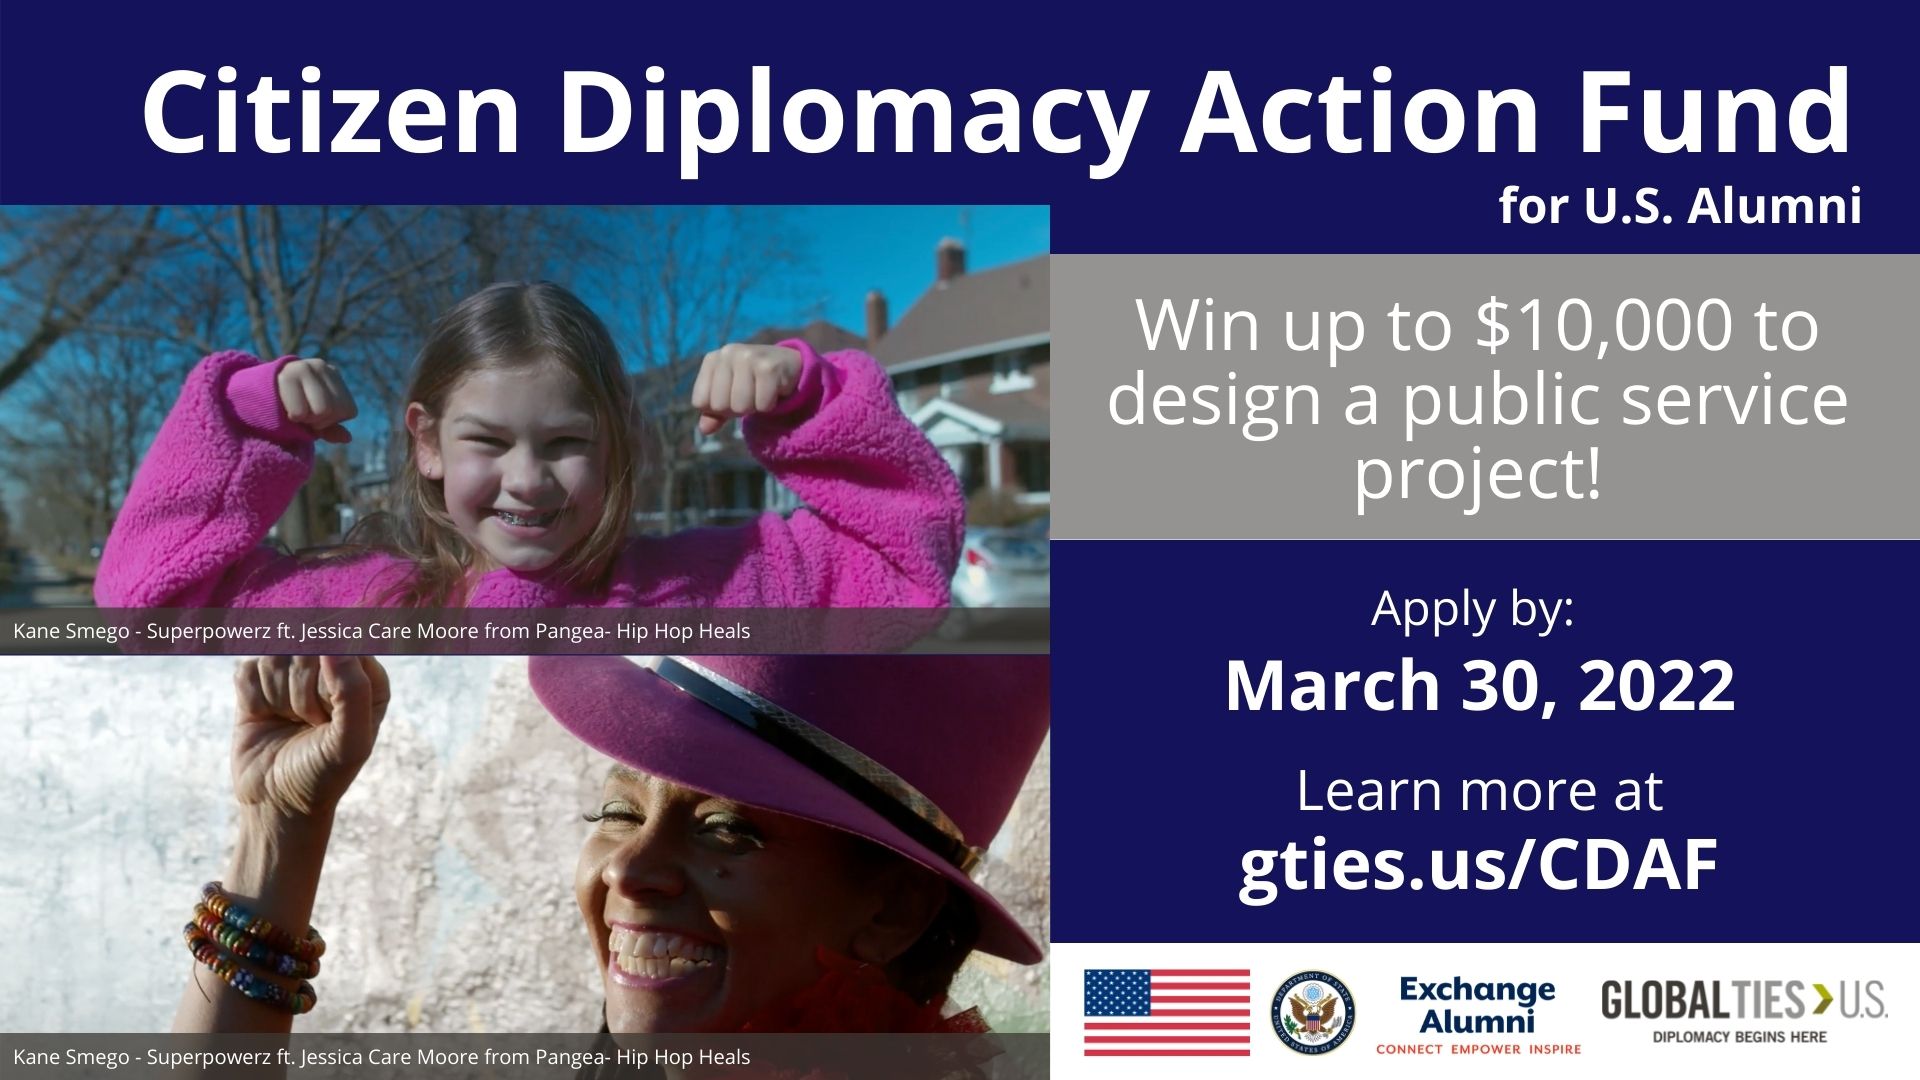 Learn more about the Citizen Diplomacy Action Fund for U.S. Alumni at gties.us/cdaf